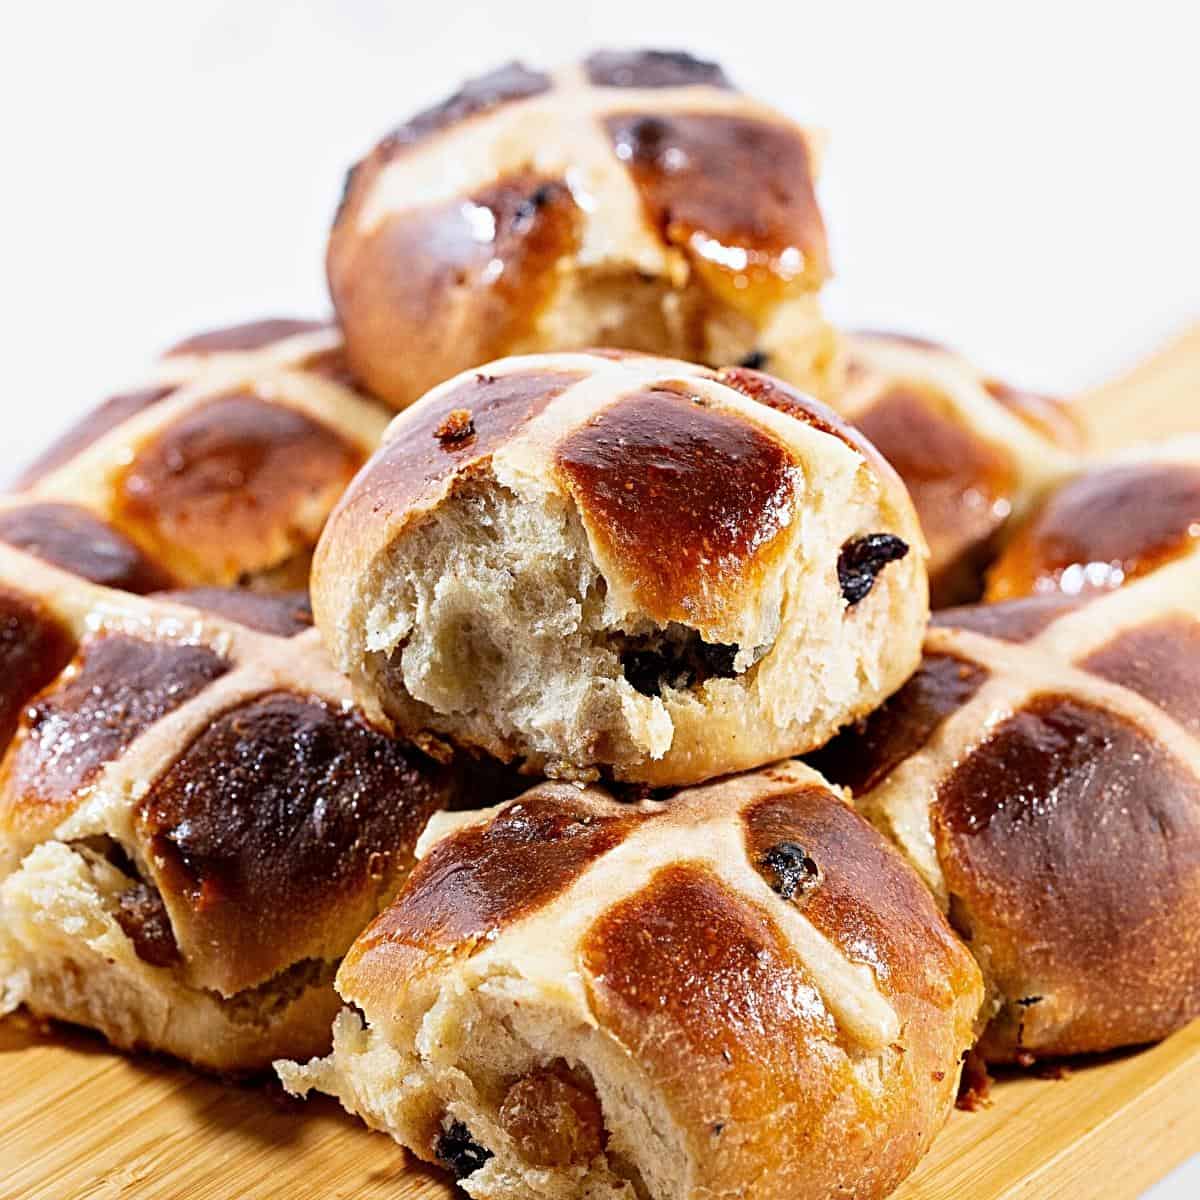 Spiced buns for Easter on the table with cross.